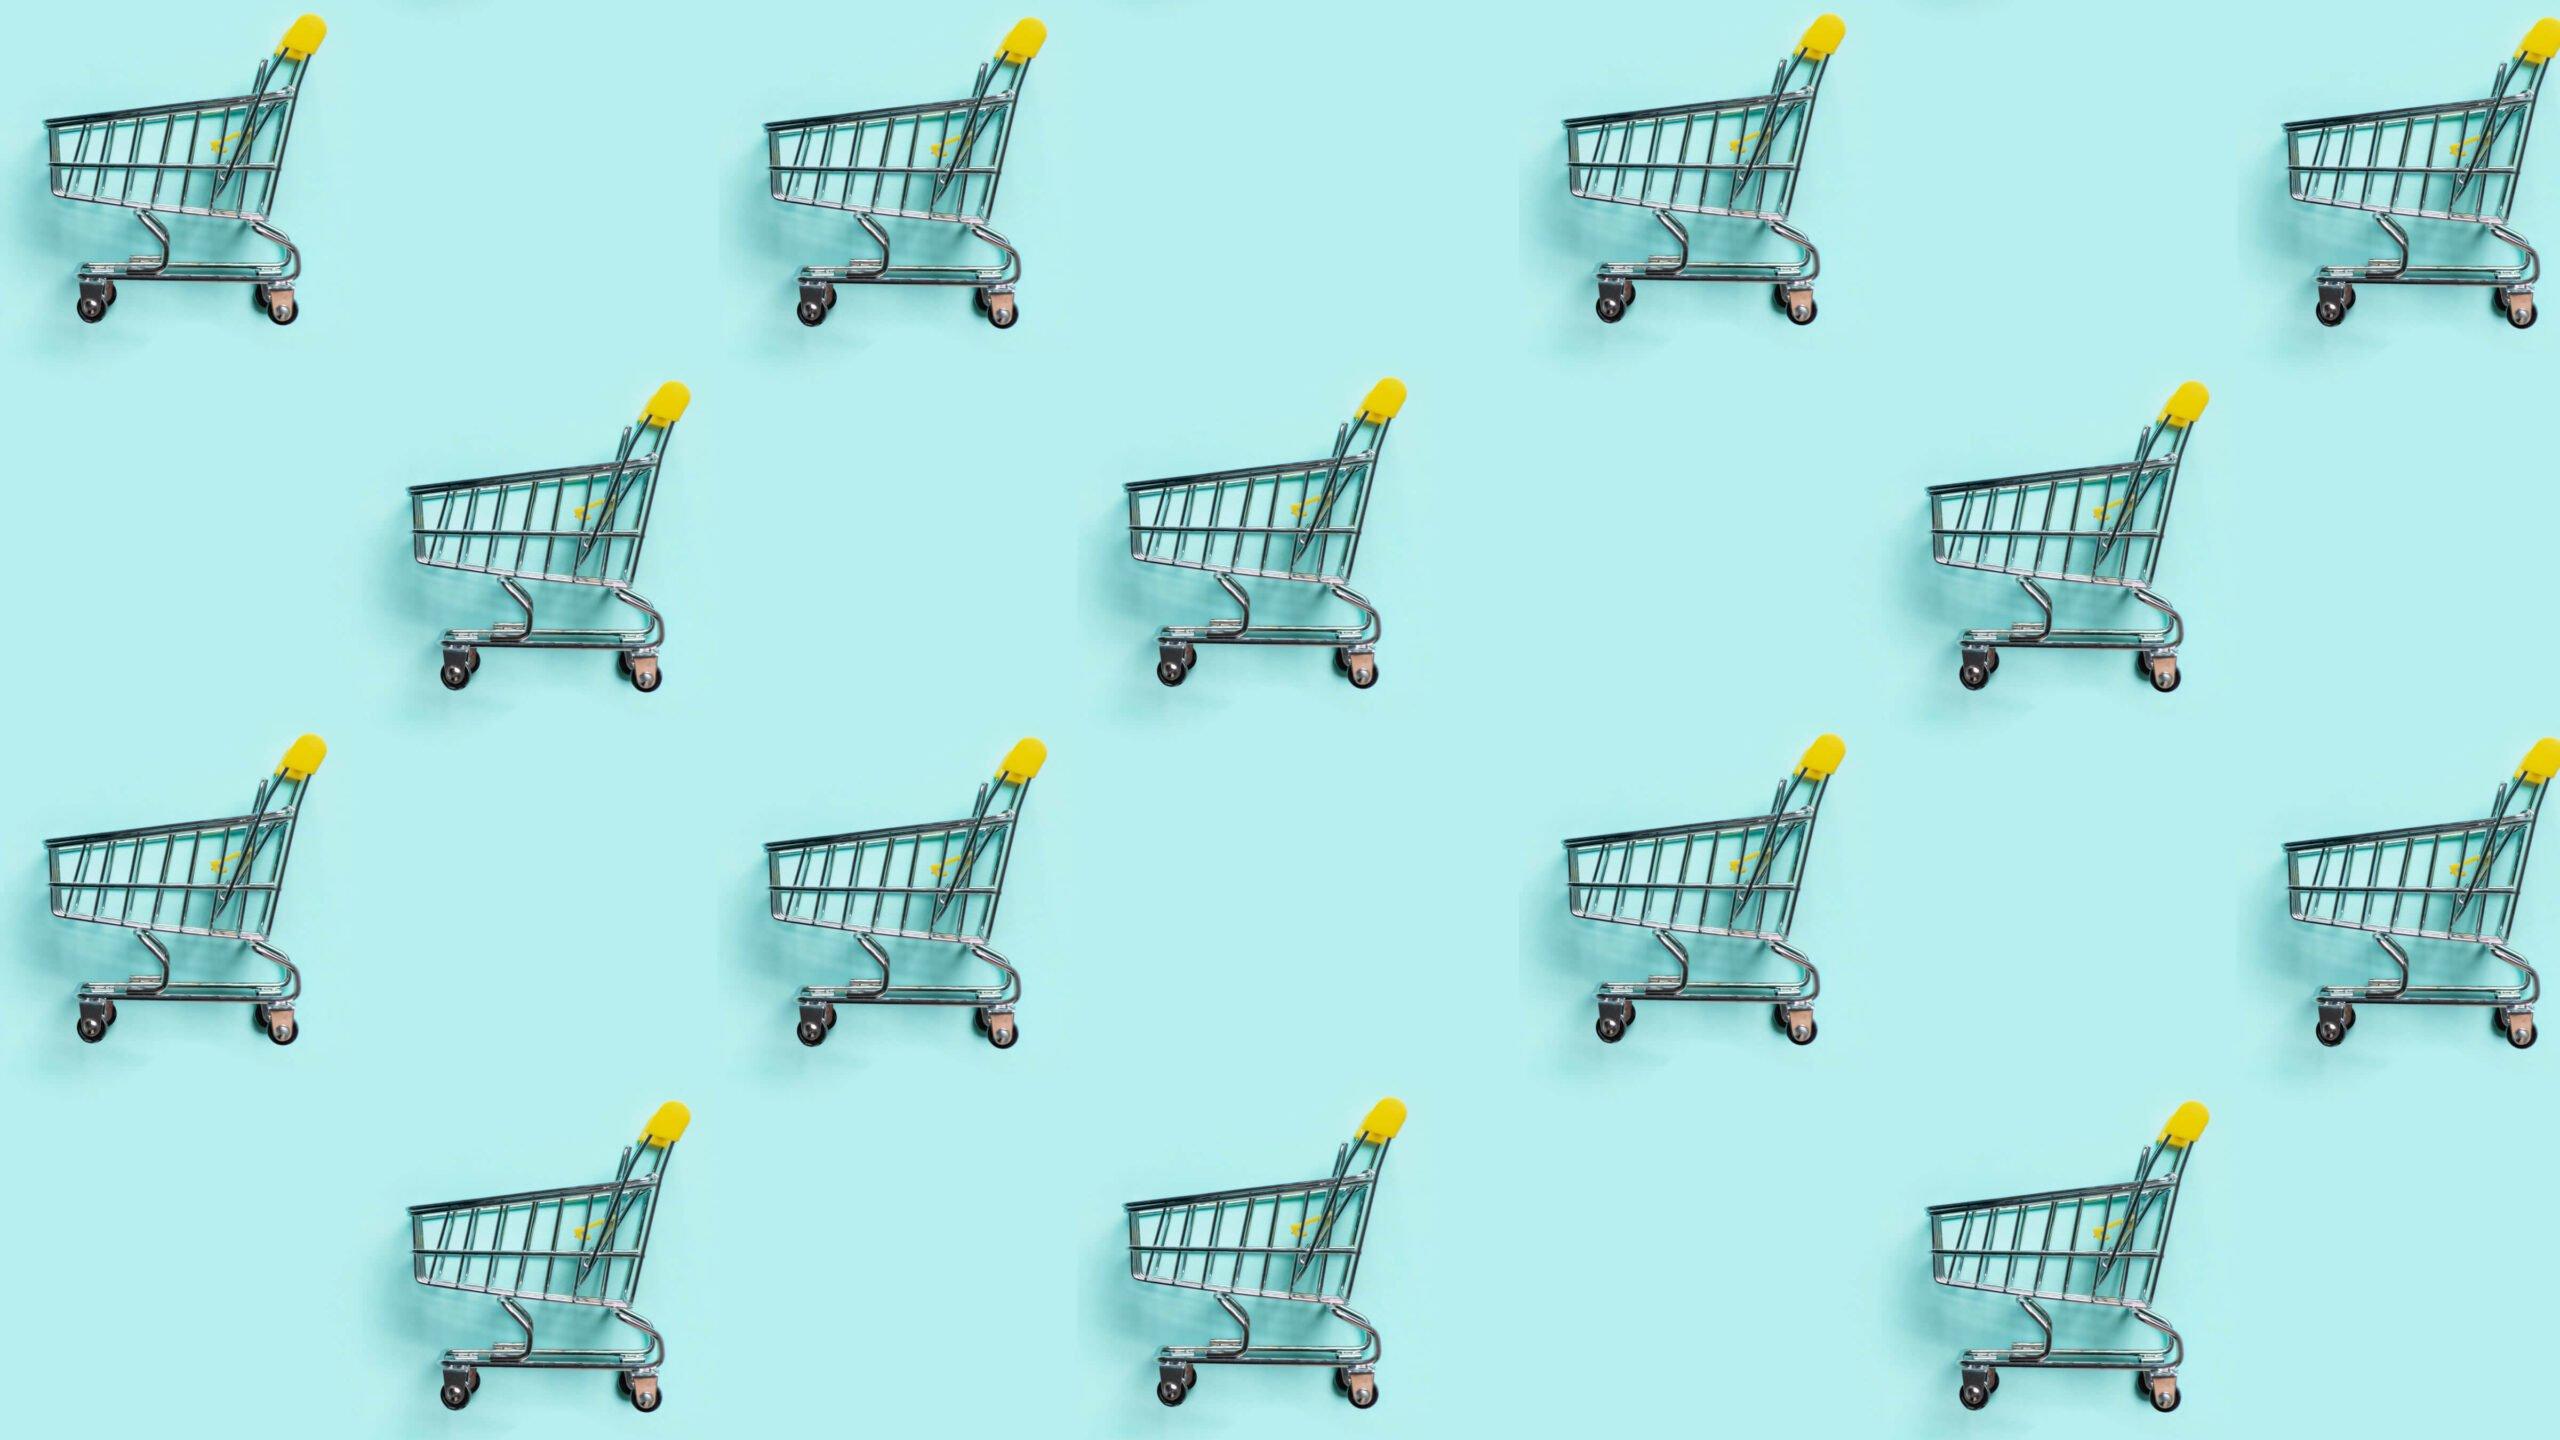 Top 10 eCommerce Trends to Look Out For in 2022